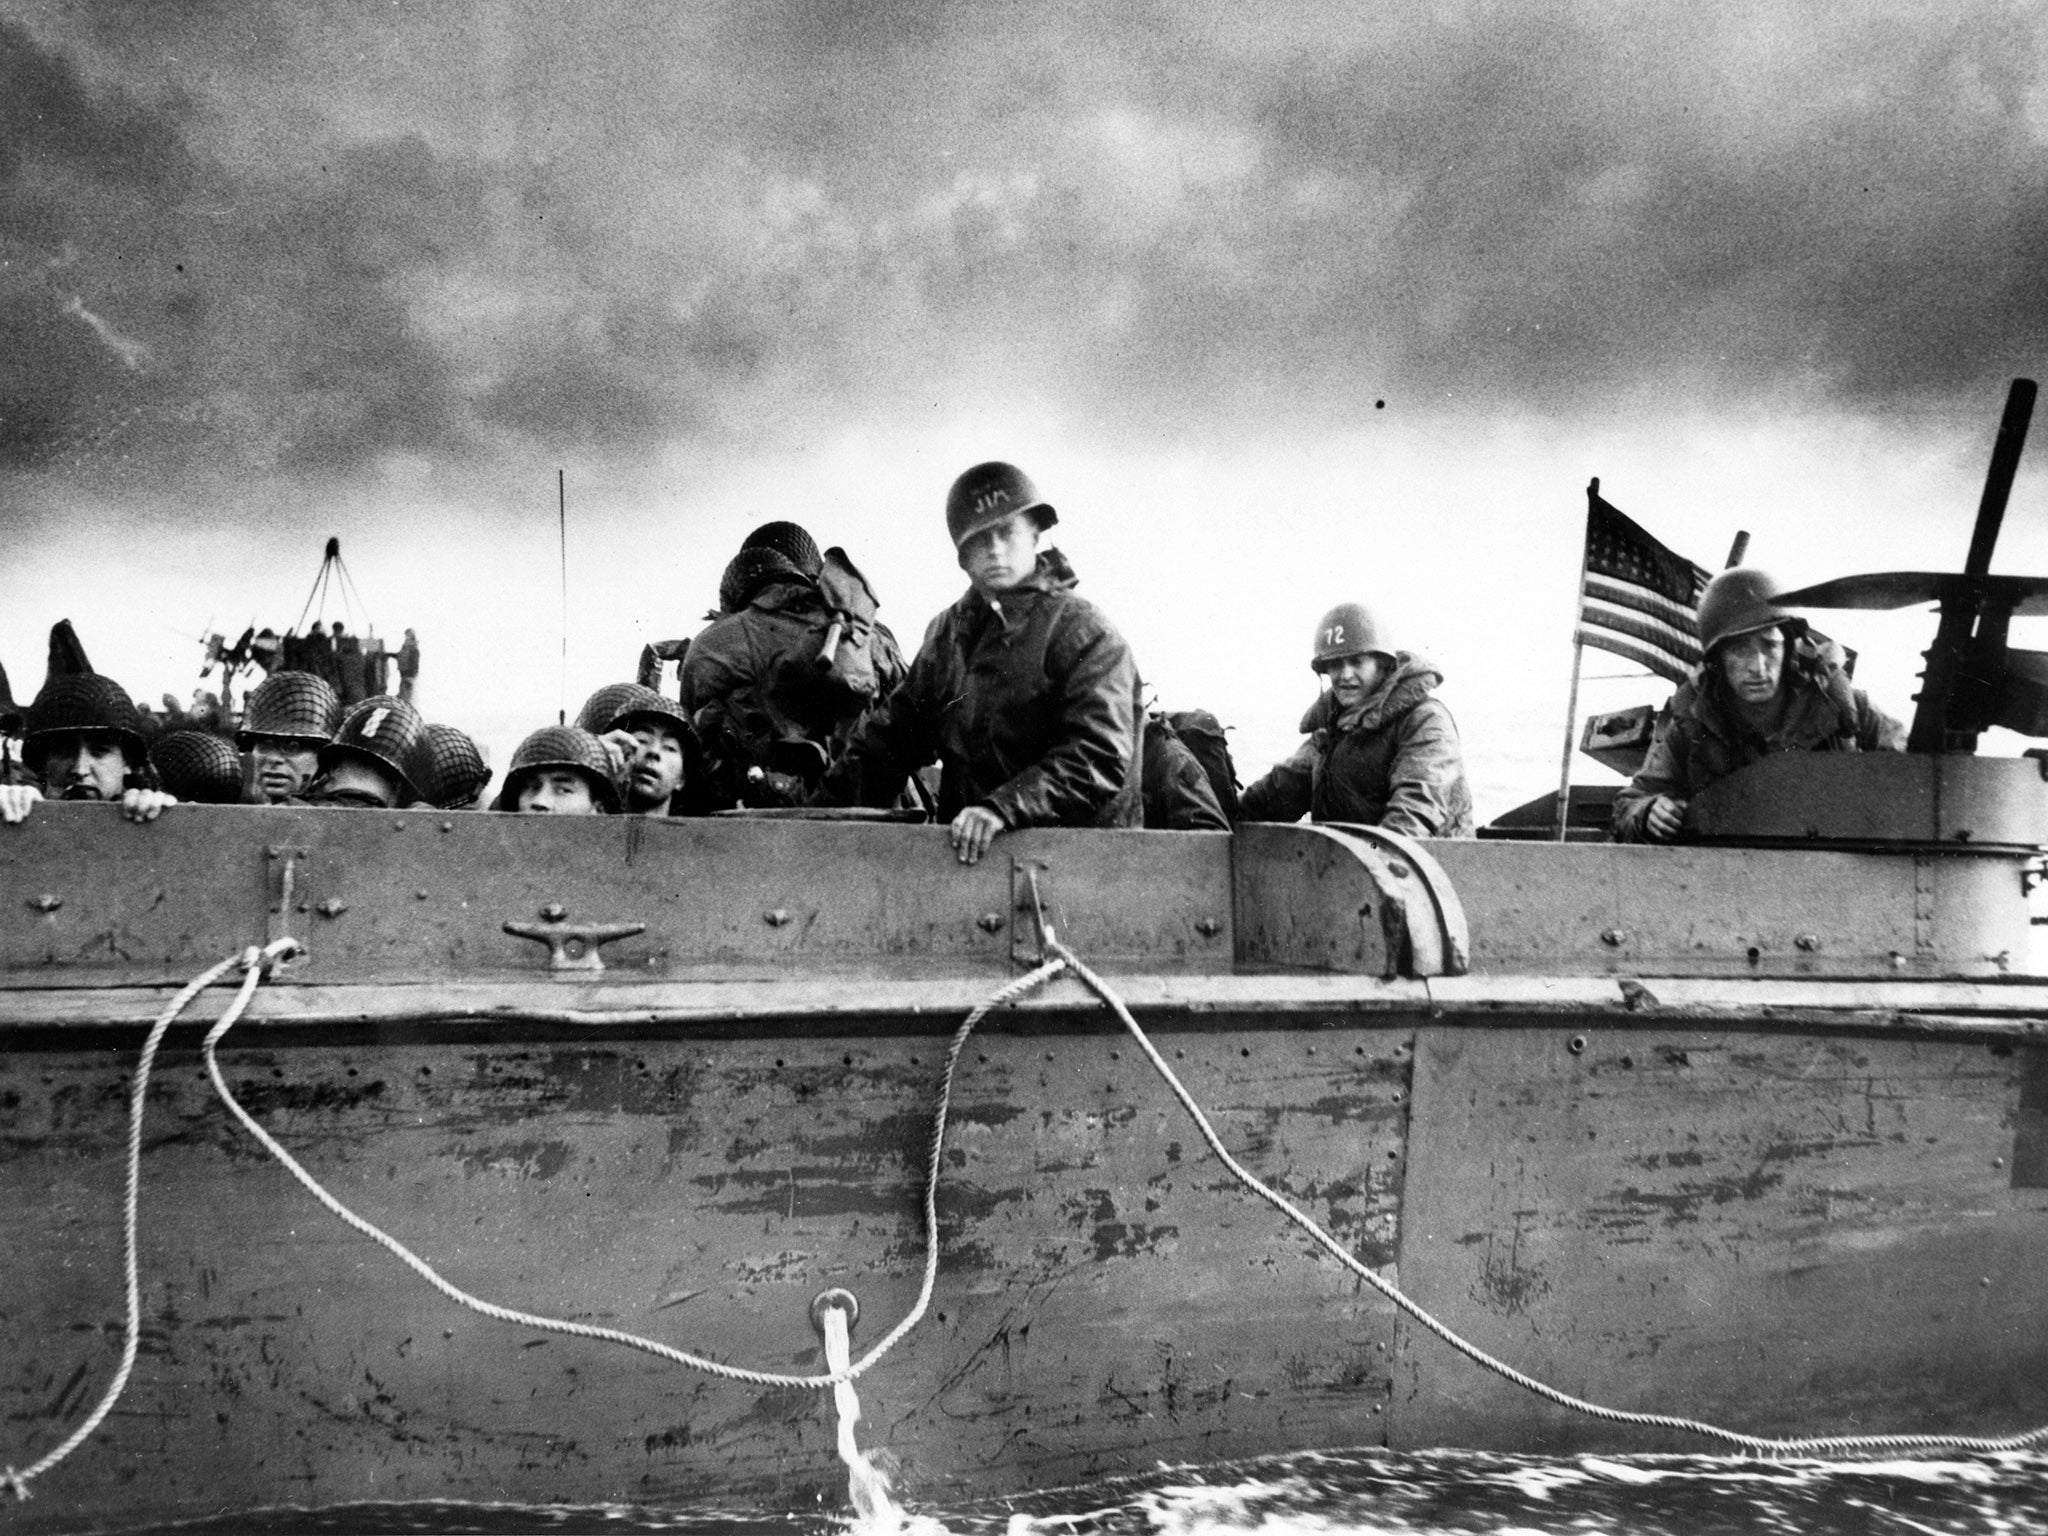 US army troops aboard a Coast Guard landing vehicle approach a beach on D-Day in Normandy, France, on June 6, 1944